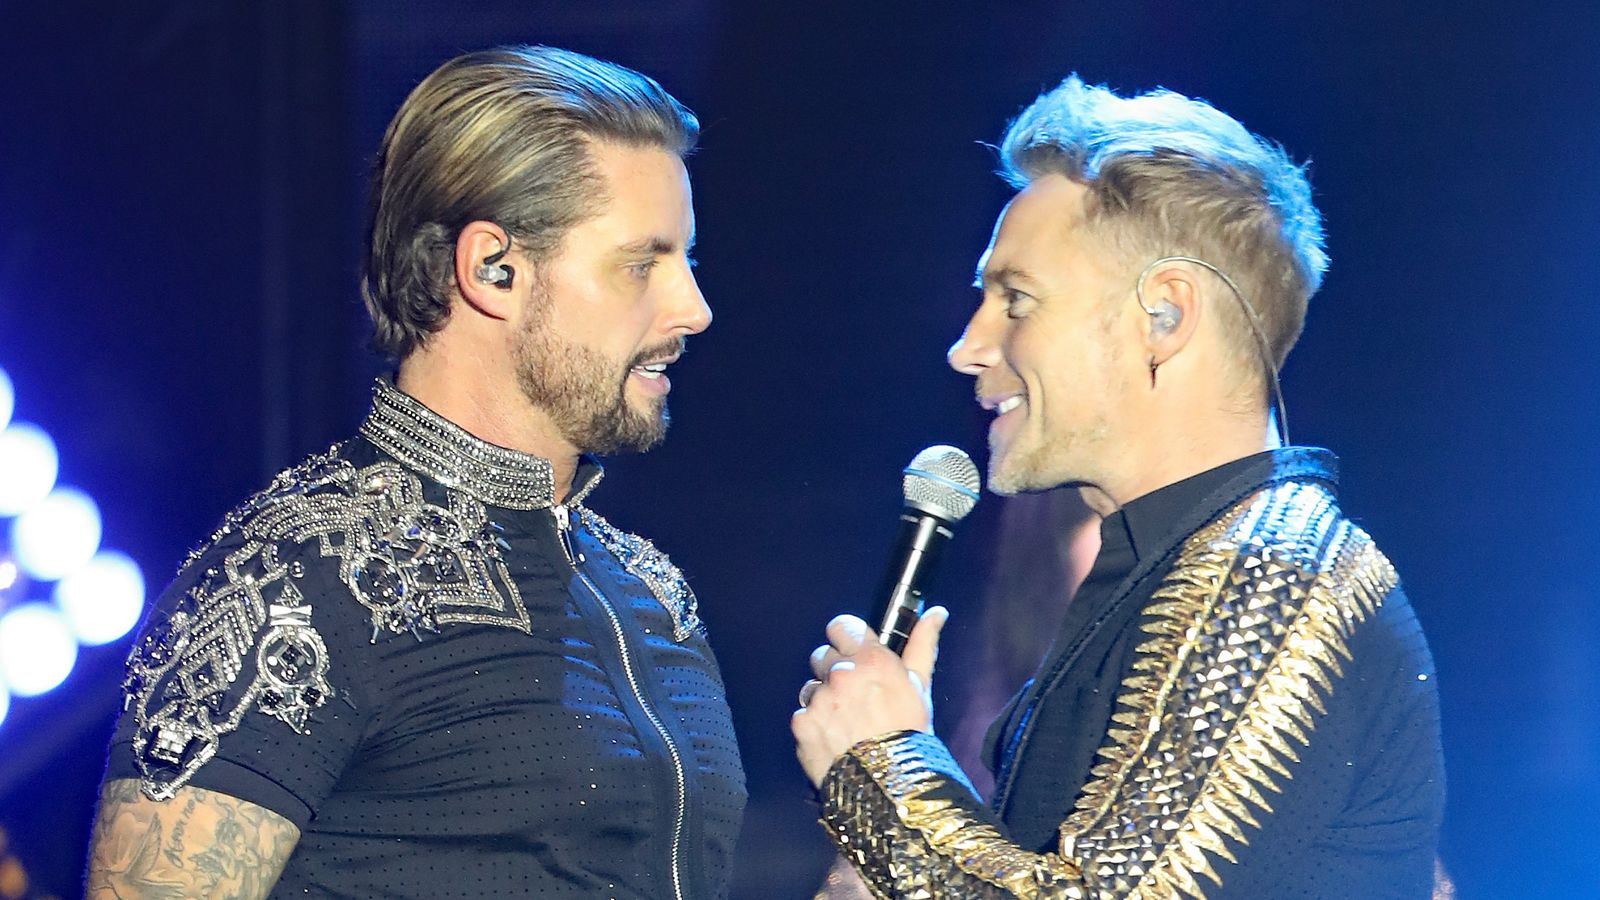 Boyzone's Keith Duffy pays tribute after Ronan Keating's brother Ciaran dies in car crash